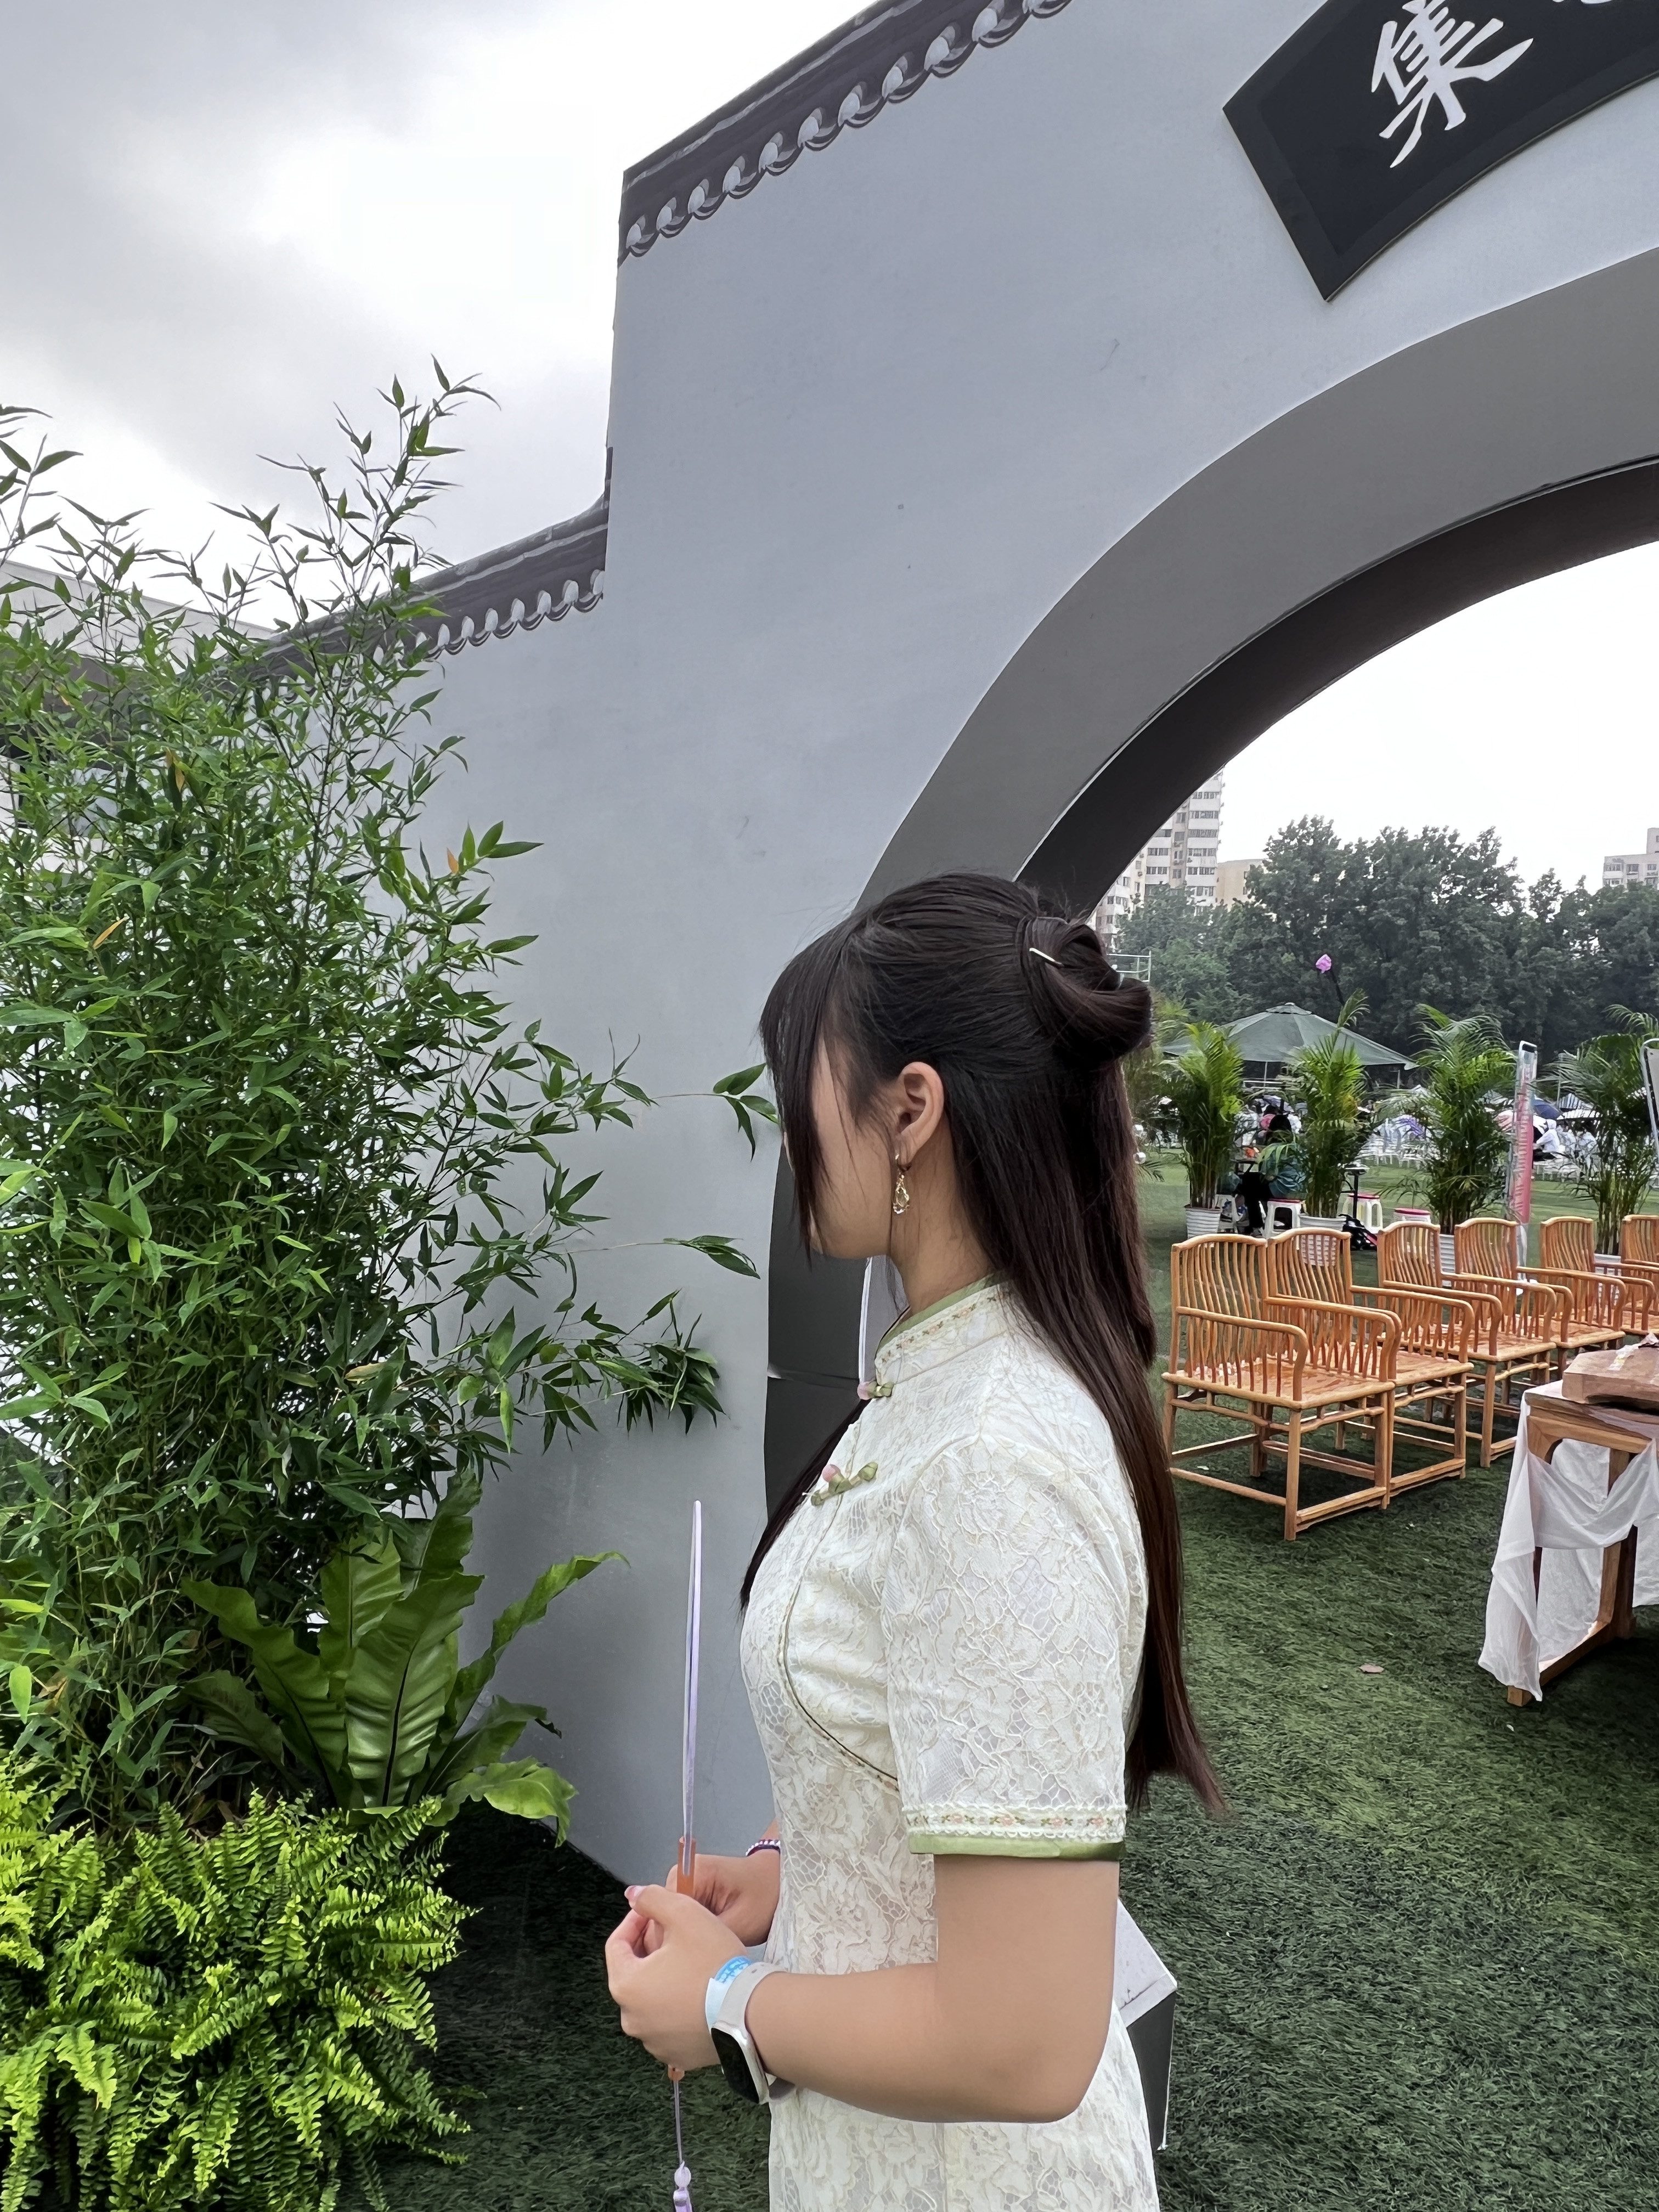 Wearing Cheongsam for the Cultural Festival